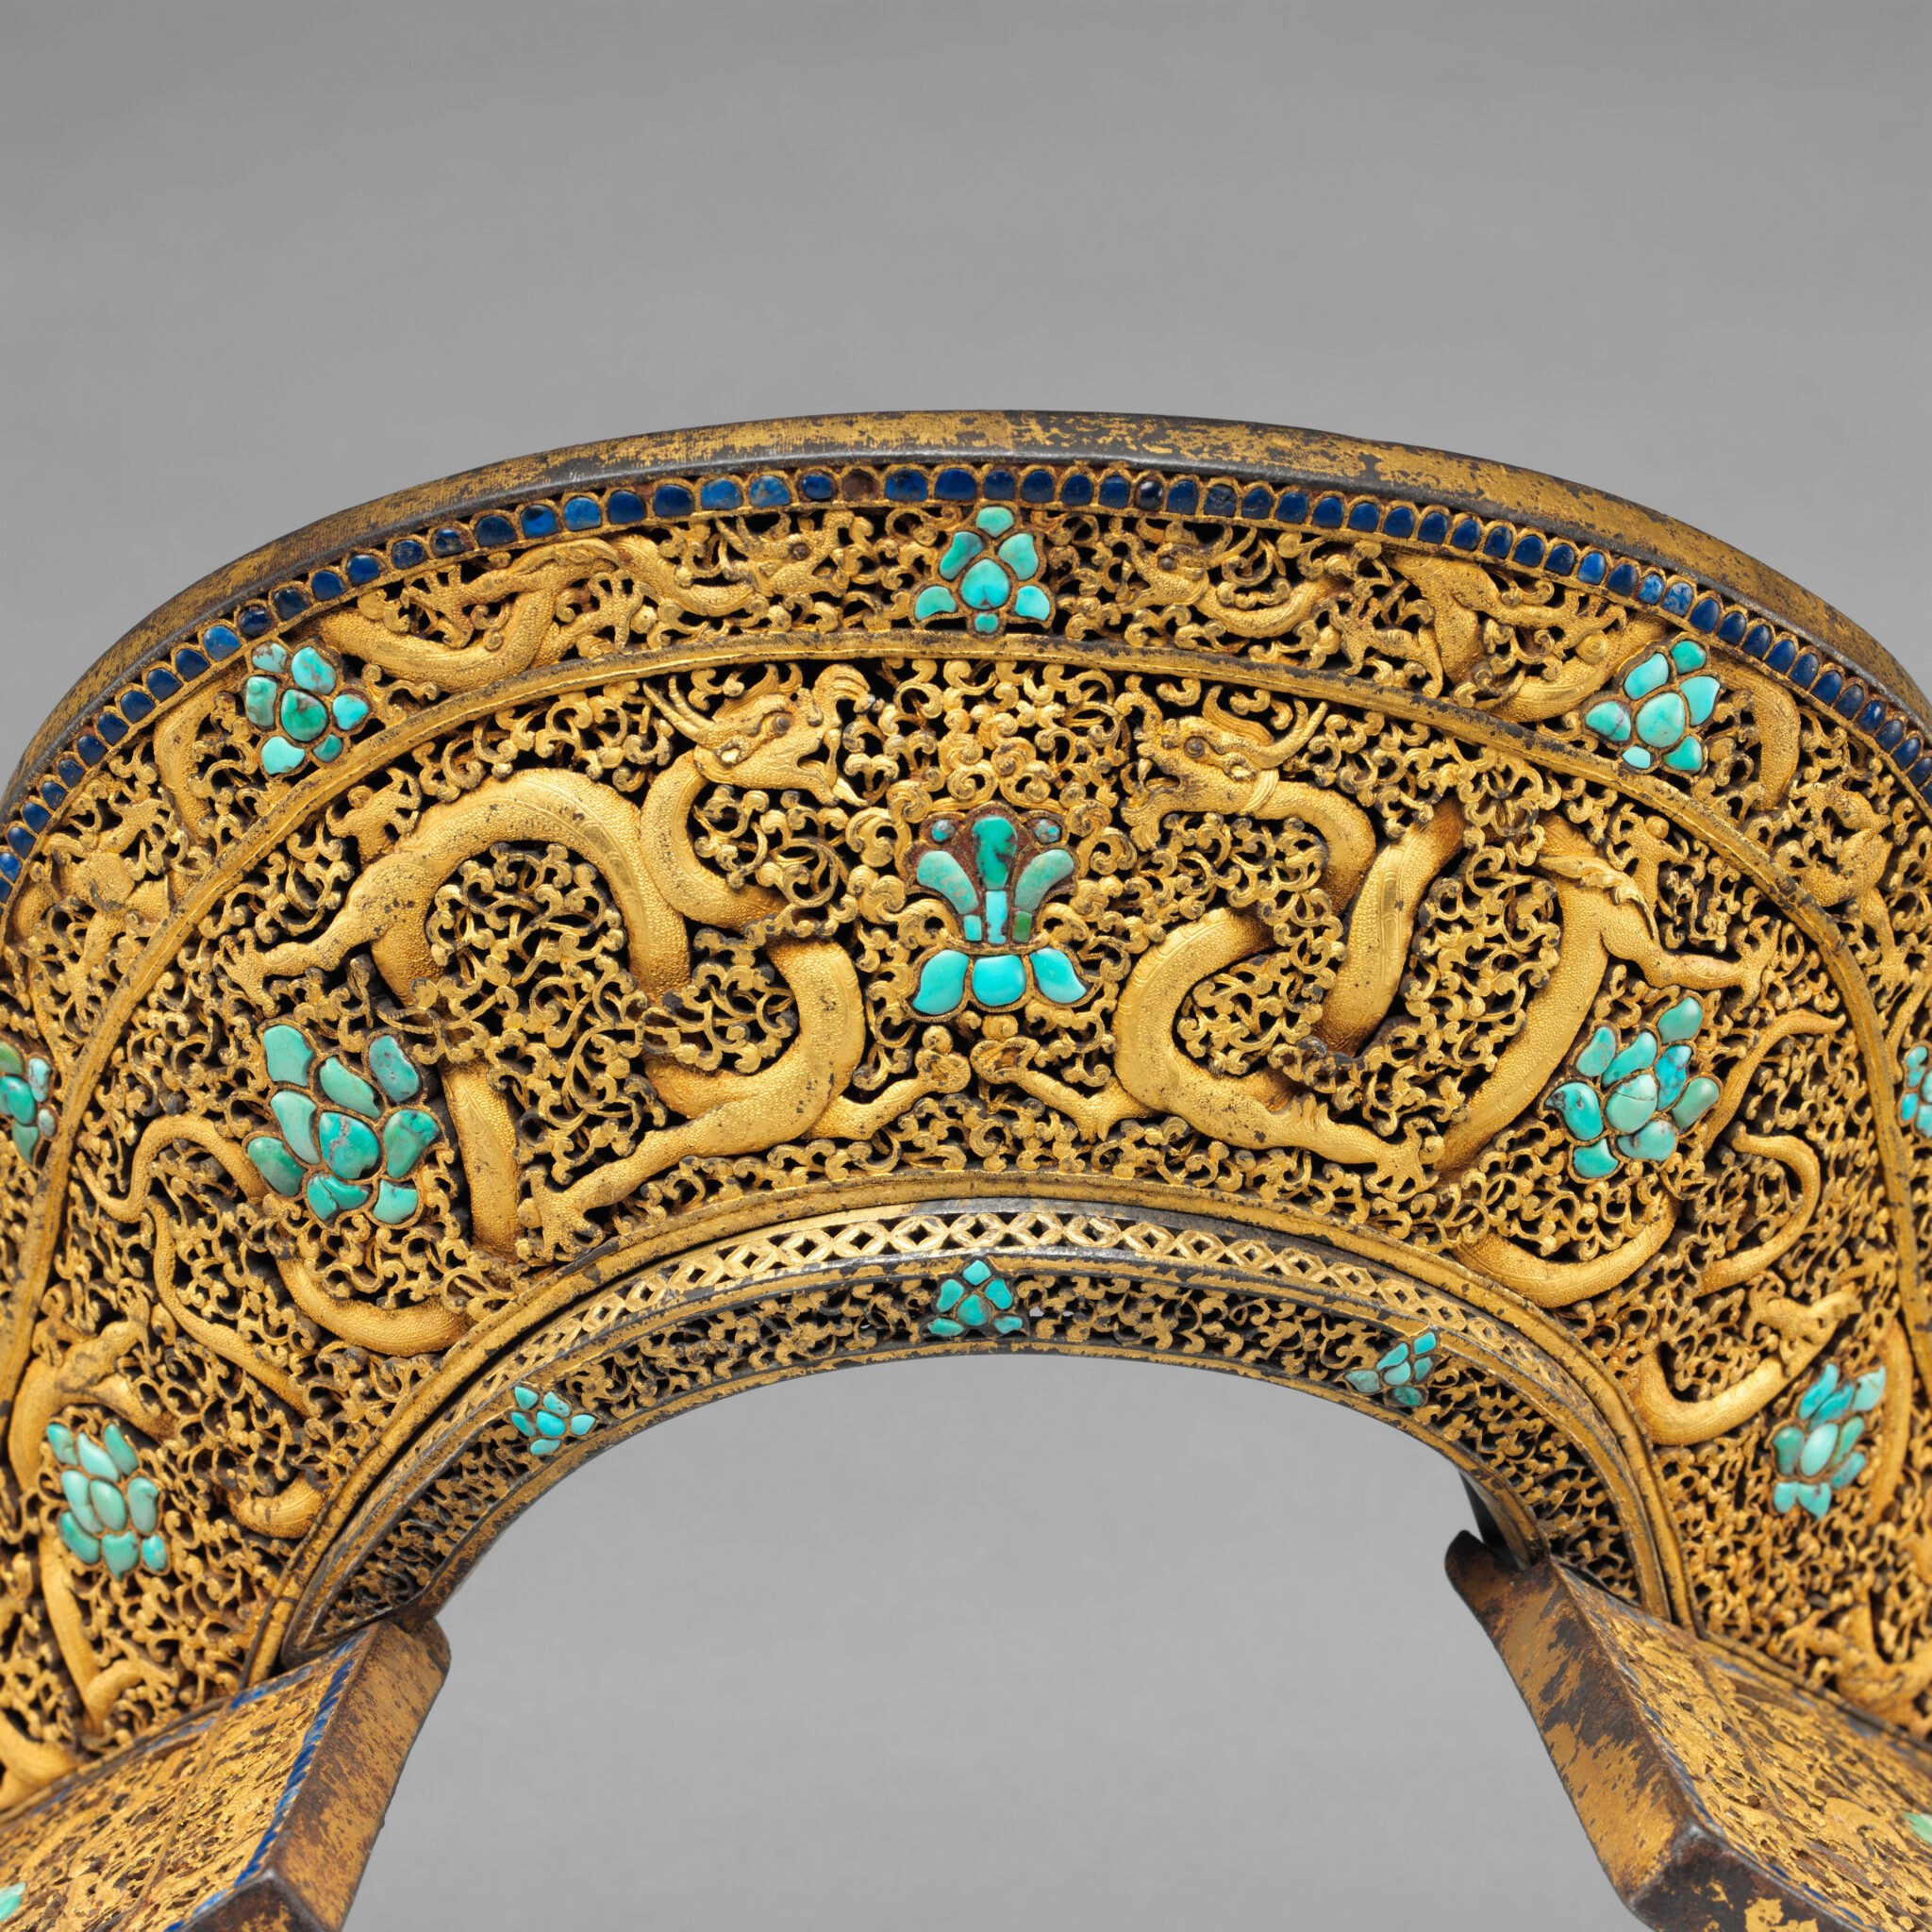 Decoration on rear saddle plate depicting dragons writhing and twisting through field of golden filigree scrollwork